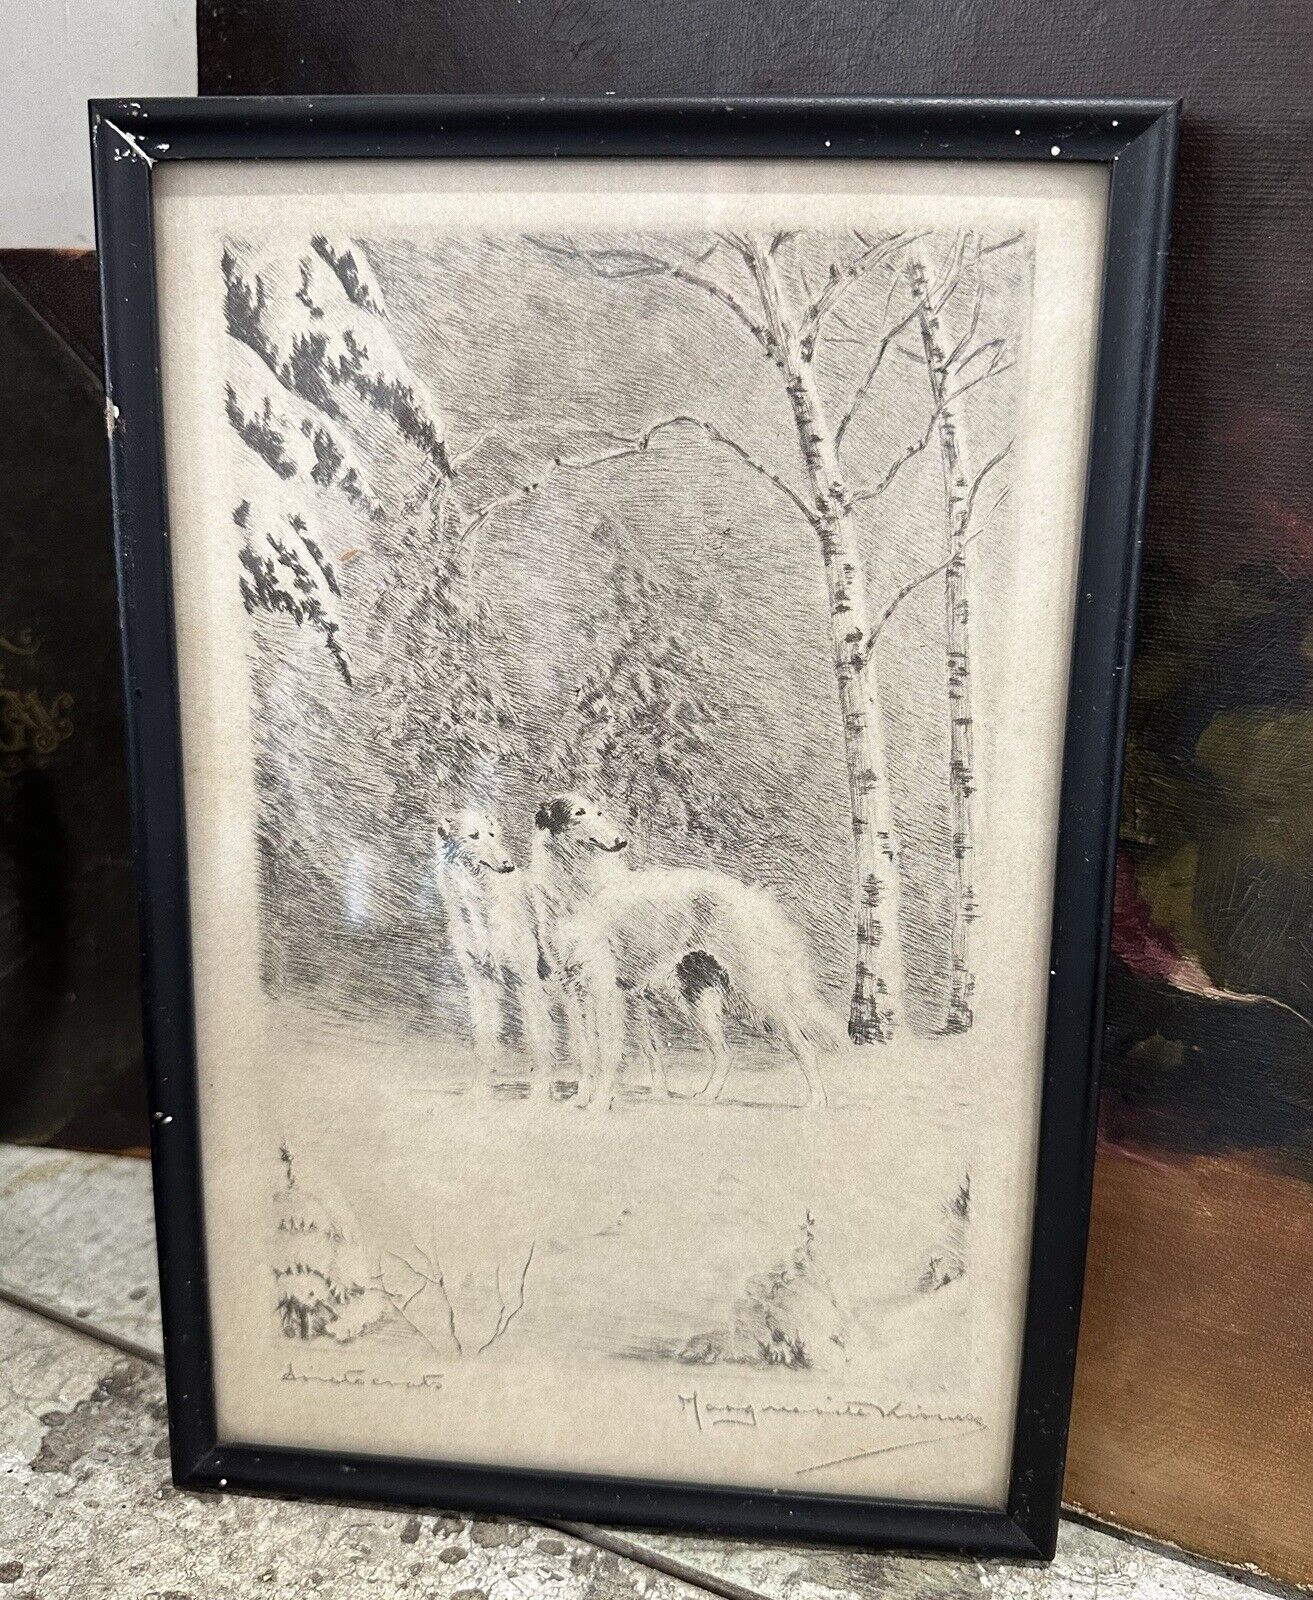 Marguerite Kirmse framed etching signed/ titled Aristocrats in pencil by artist